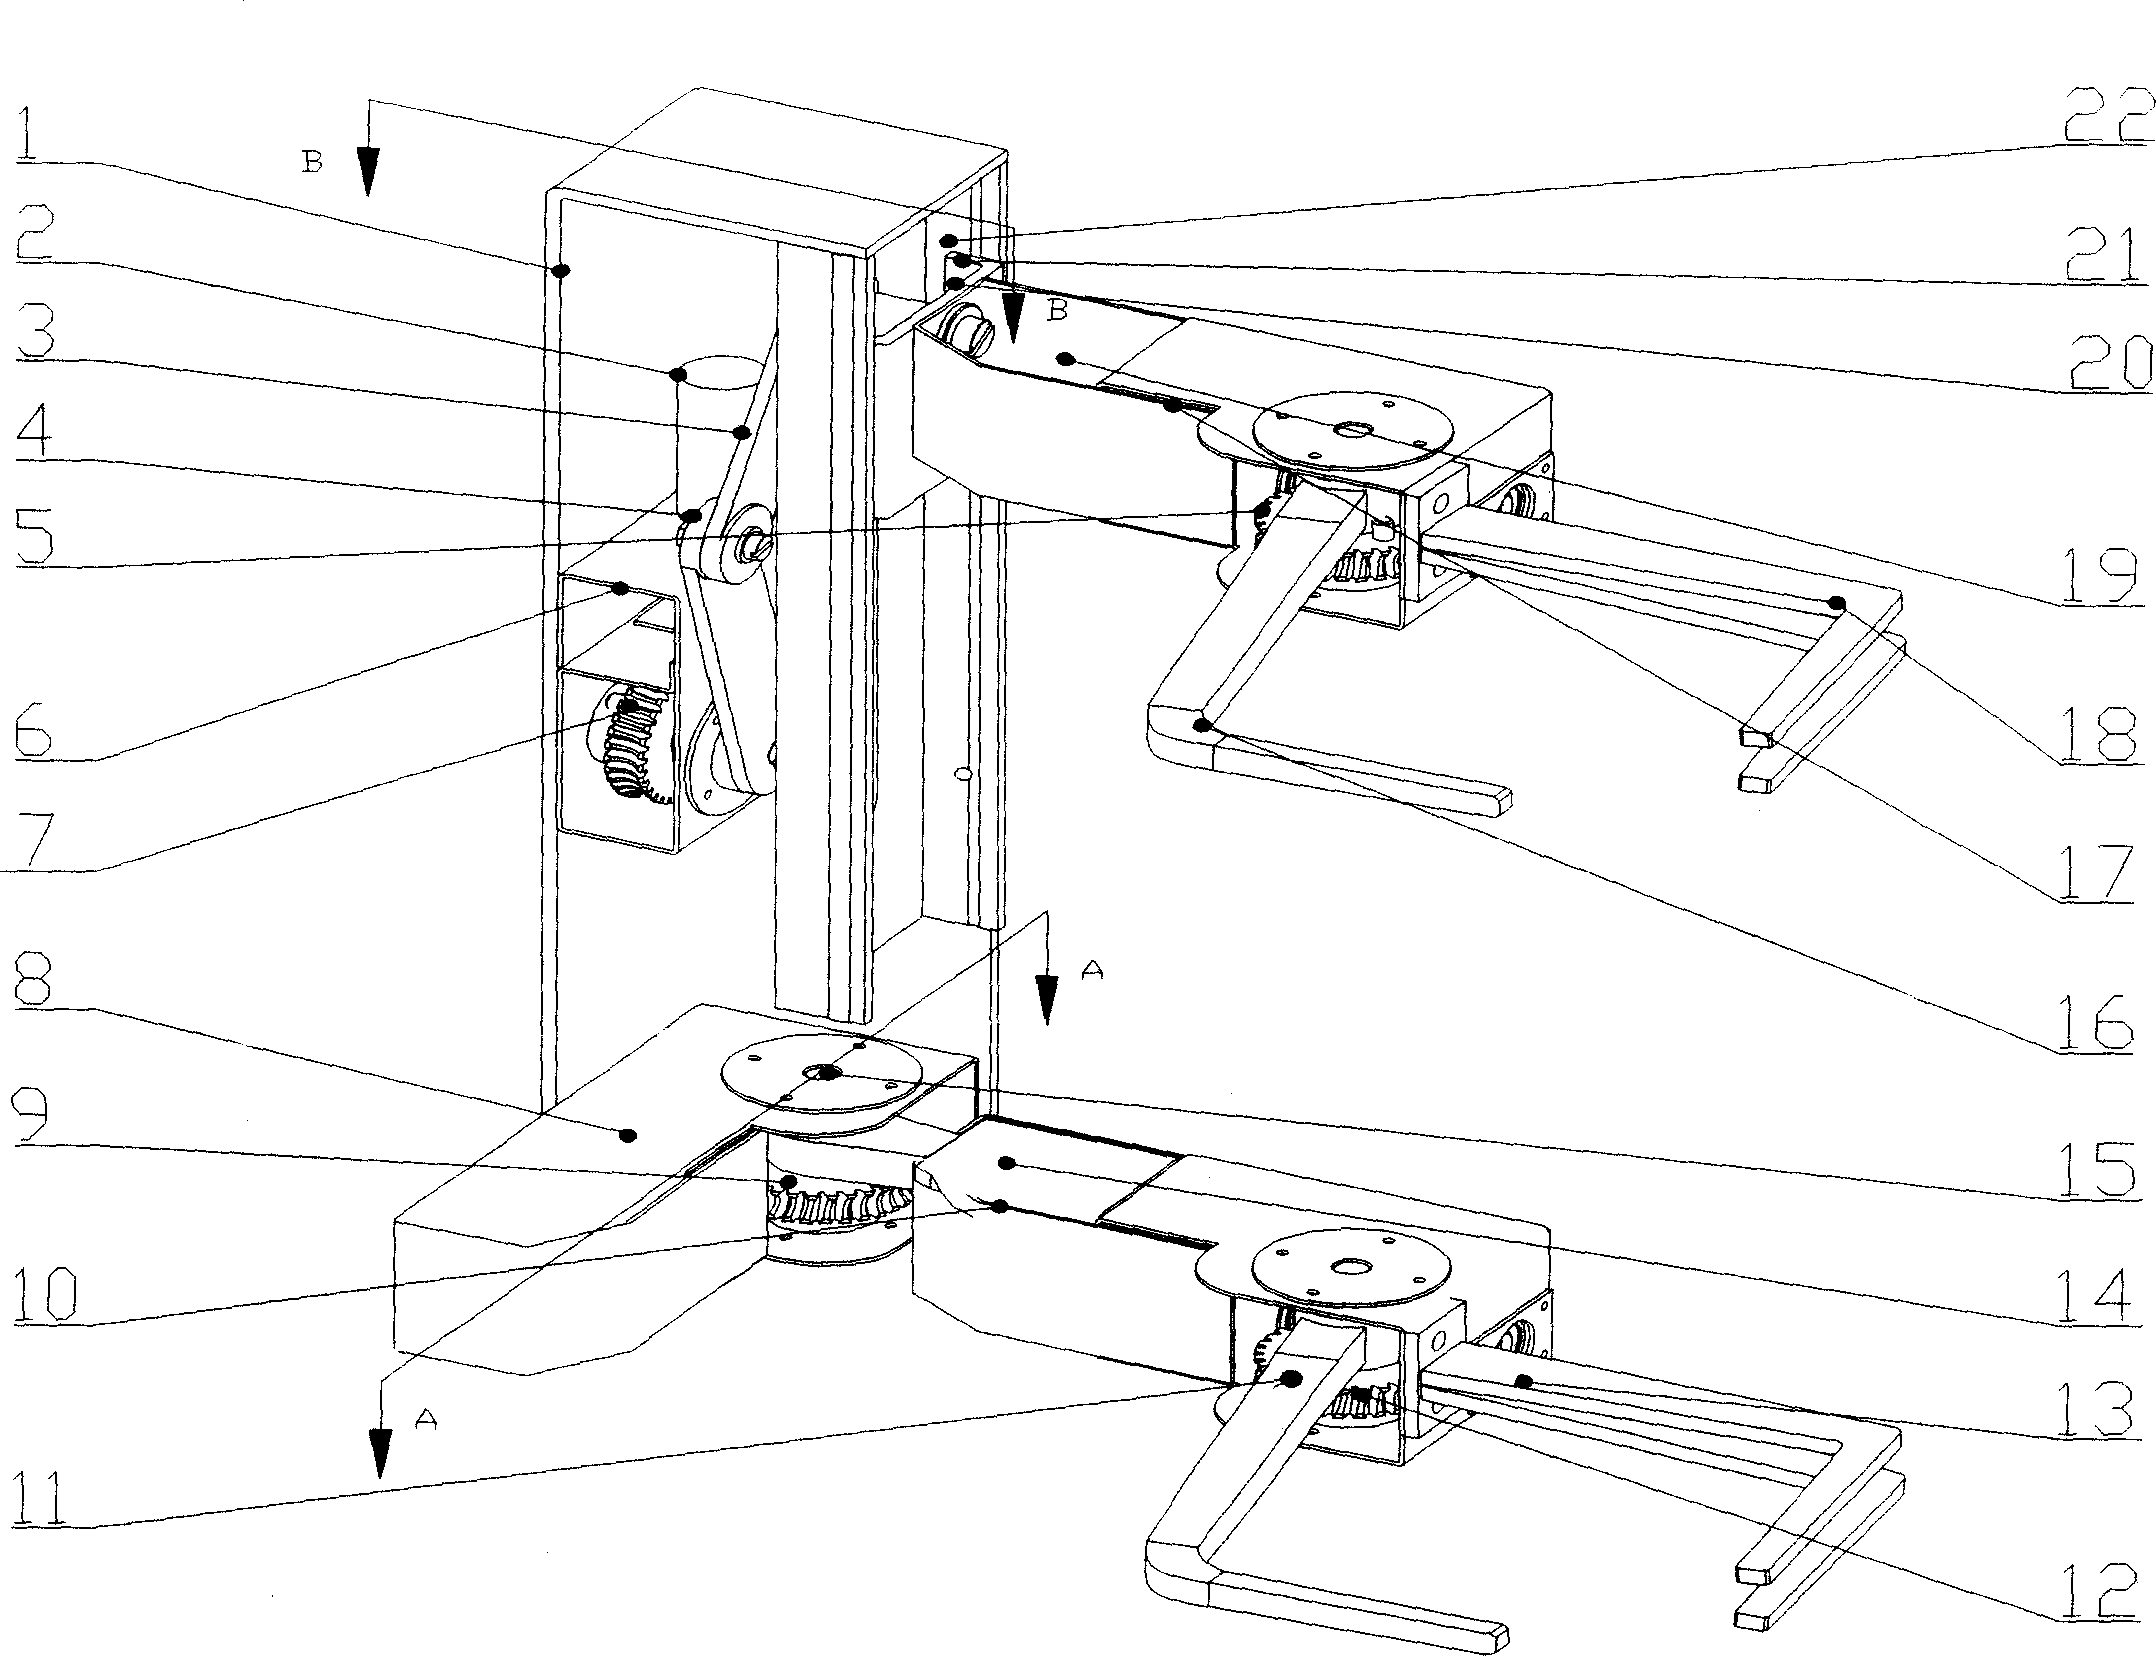 Crawl mechanism of clearing robot for suspension insulators on high voltage line